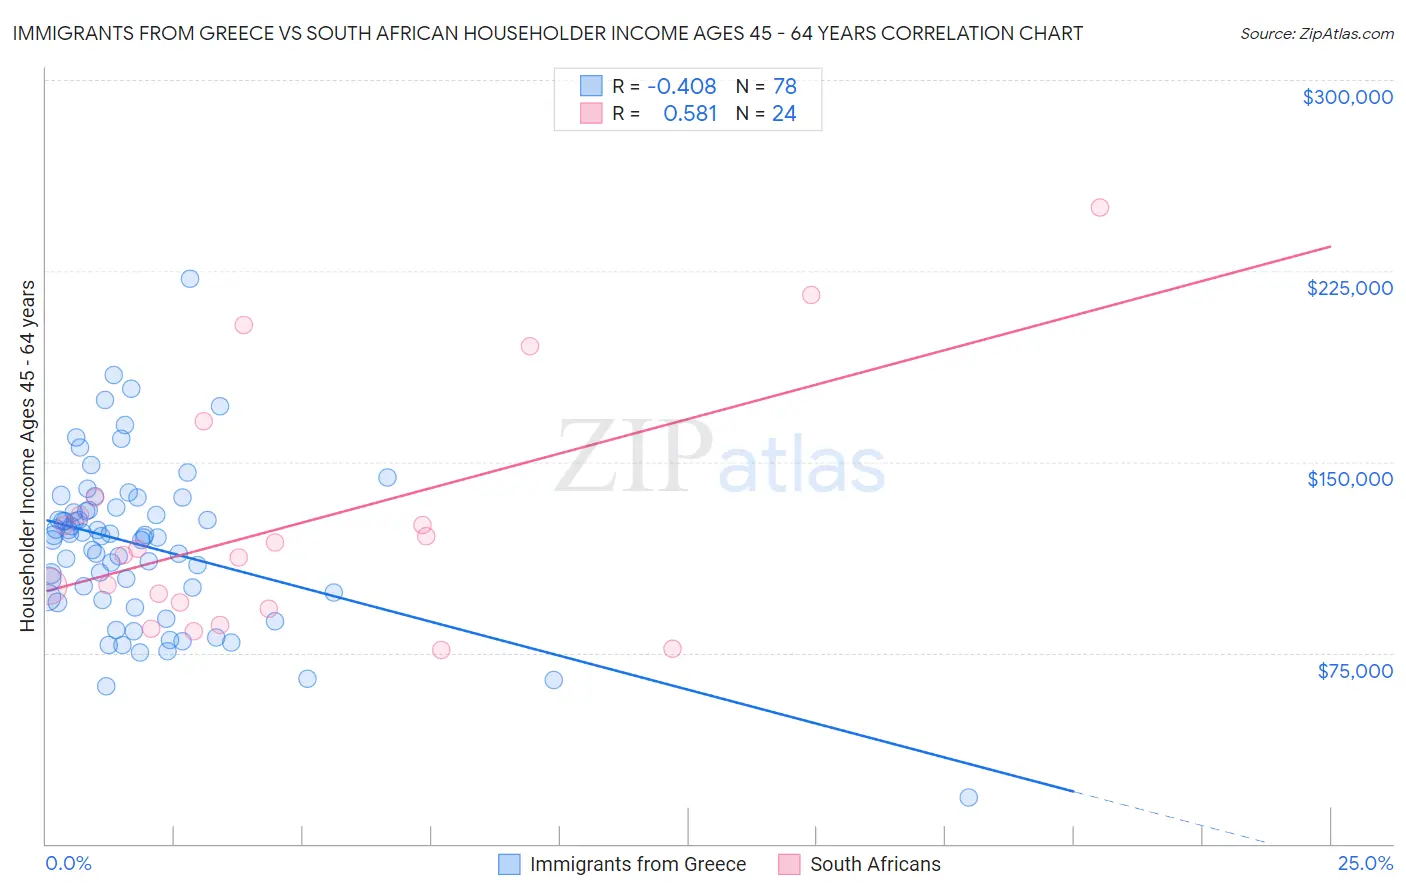 Immigrants from Greece vs South African Householder Income Ages 45 - 64 years